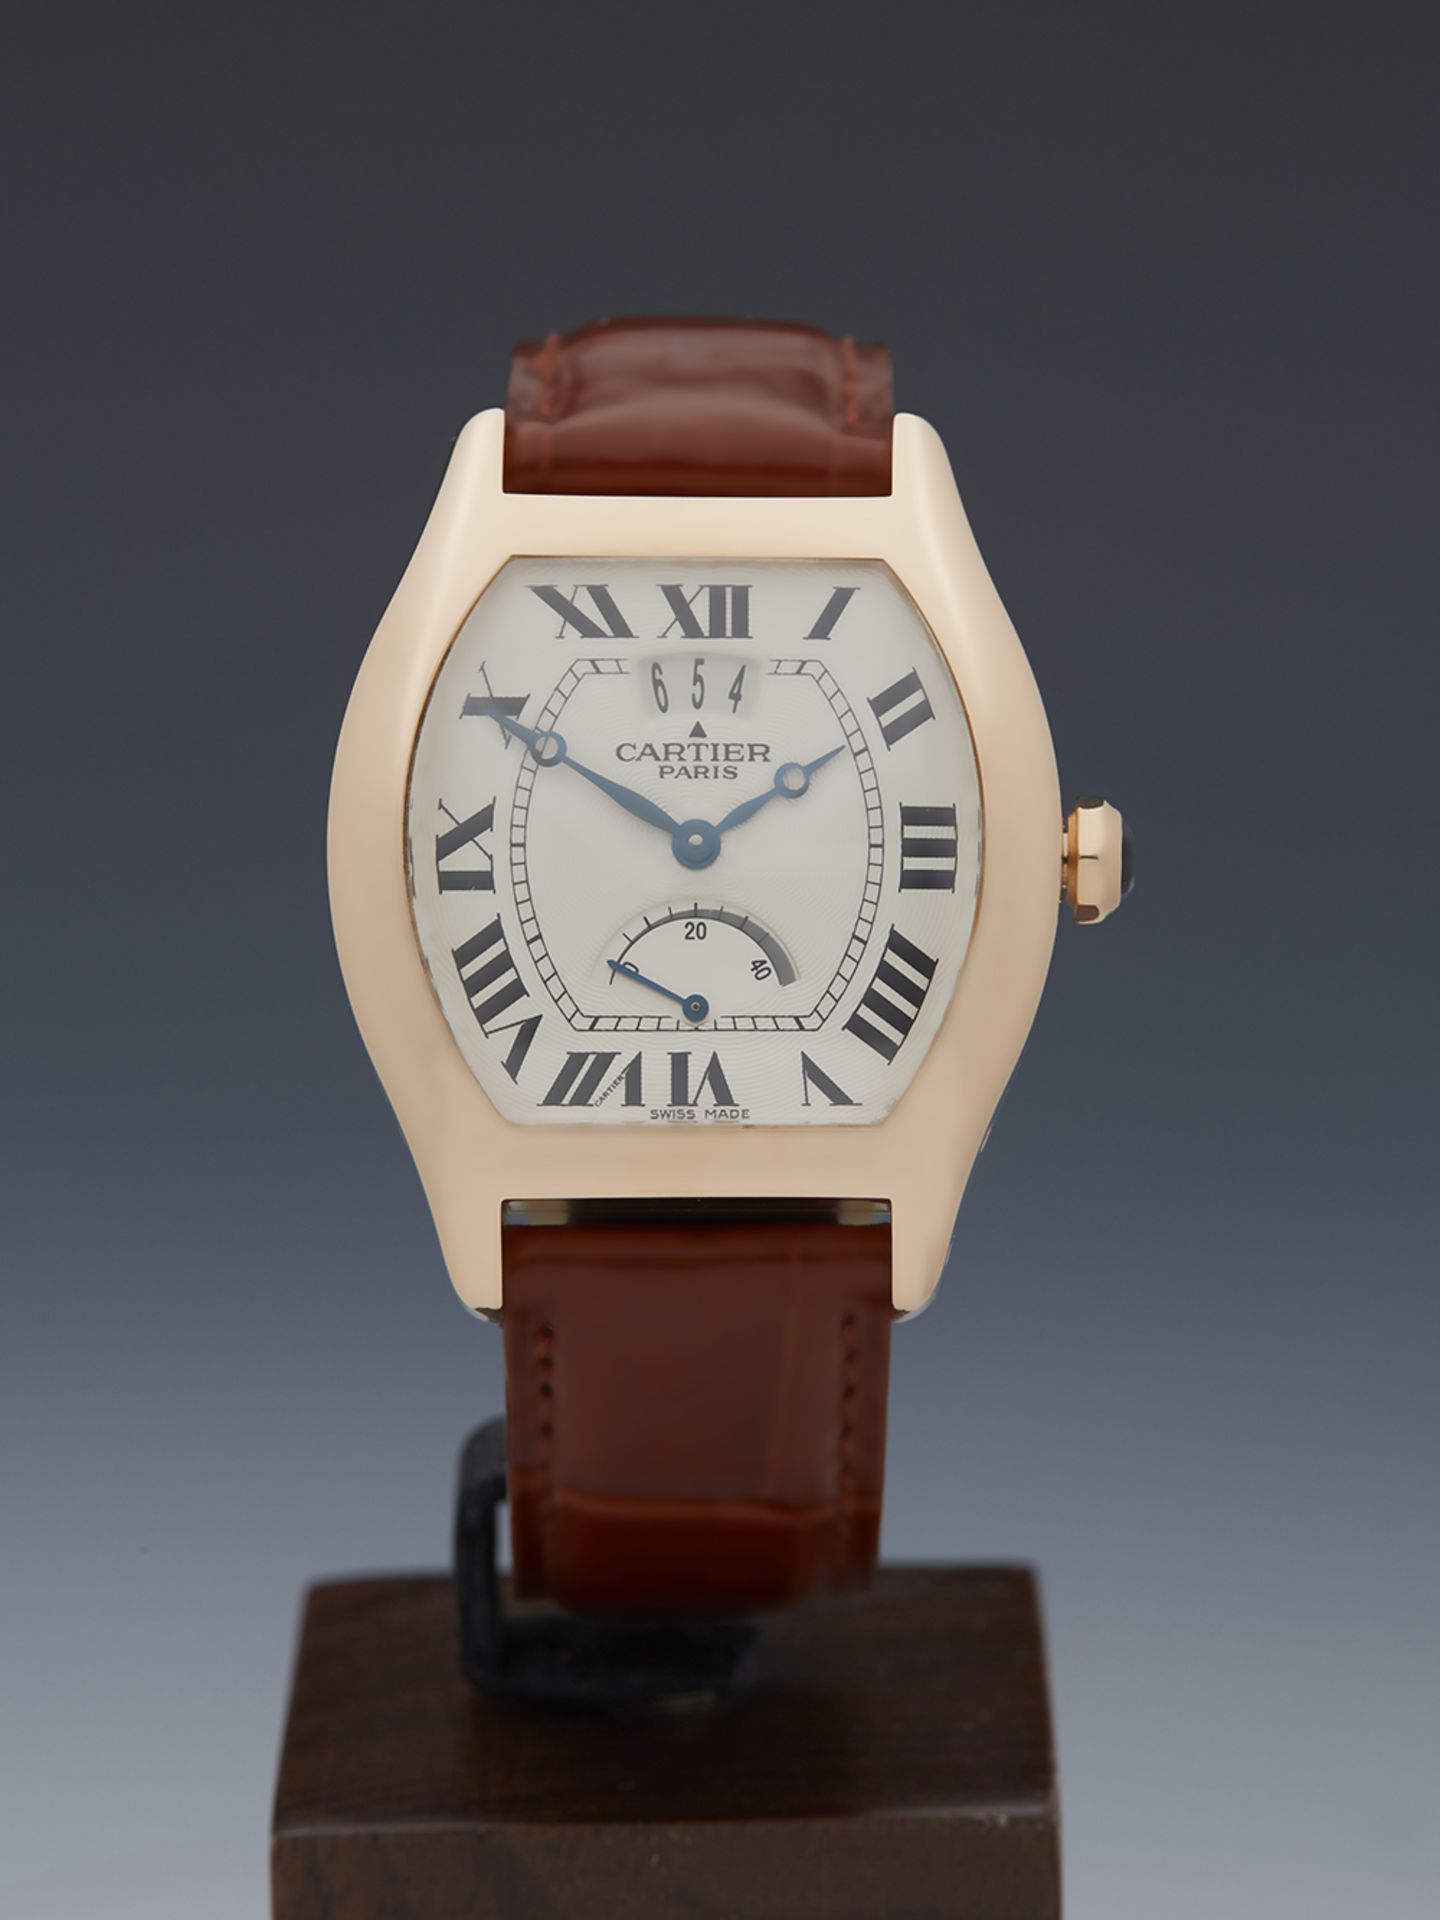 Cartier, Tortue Privee Power Reserve 18k Rose Gold Limited Edition 2689G - Image 4 of 10